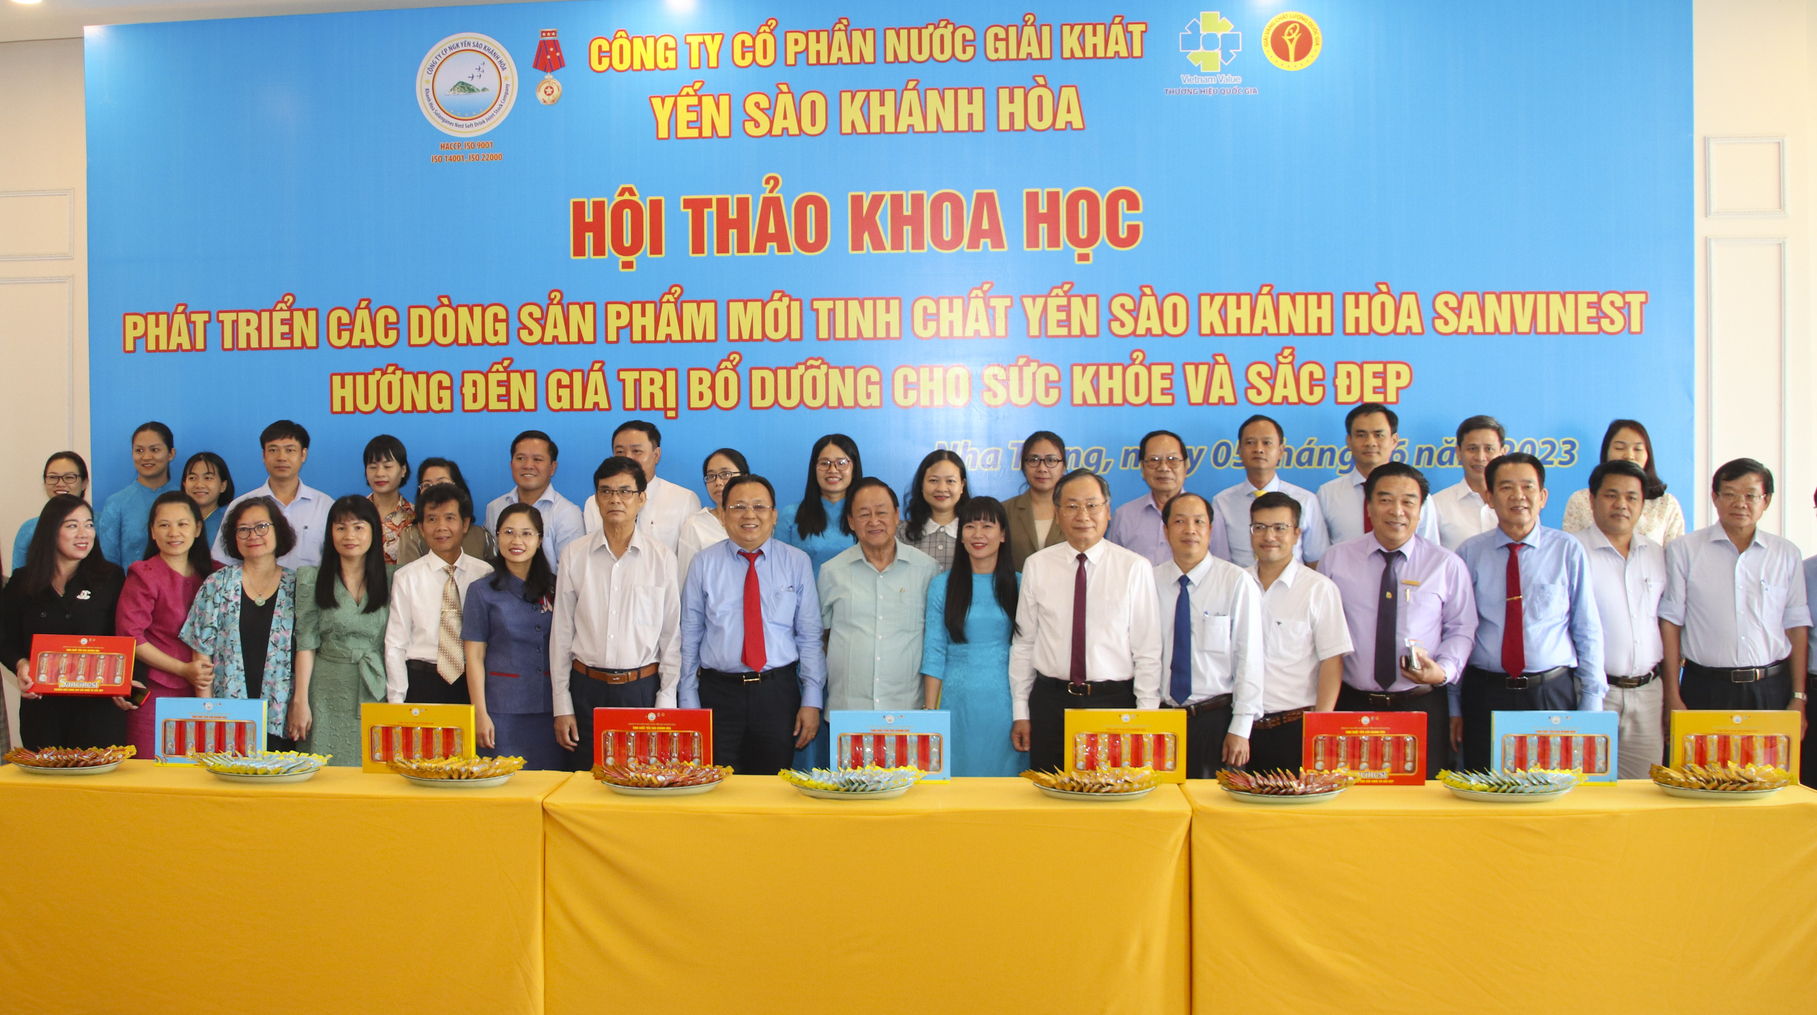 Khanh Hoa Salanganes Nest Soft Drink Joint Stock Company has researched and marketed nearly 20 product lines derived from Khanh Hoa natural bird's nest. Photo: D.L.